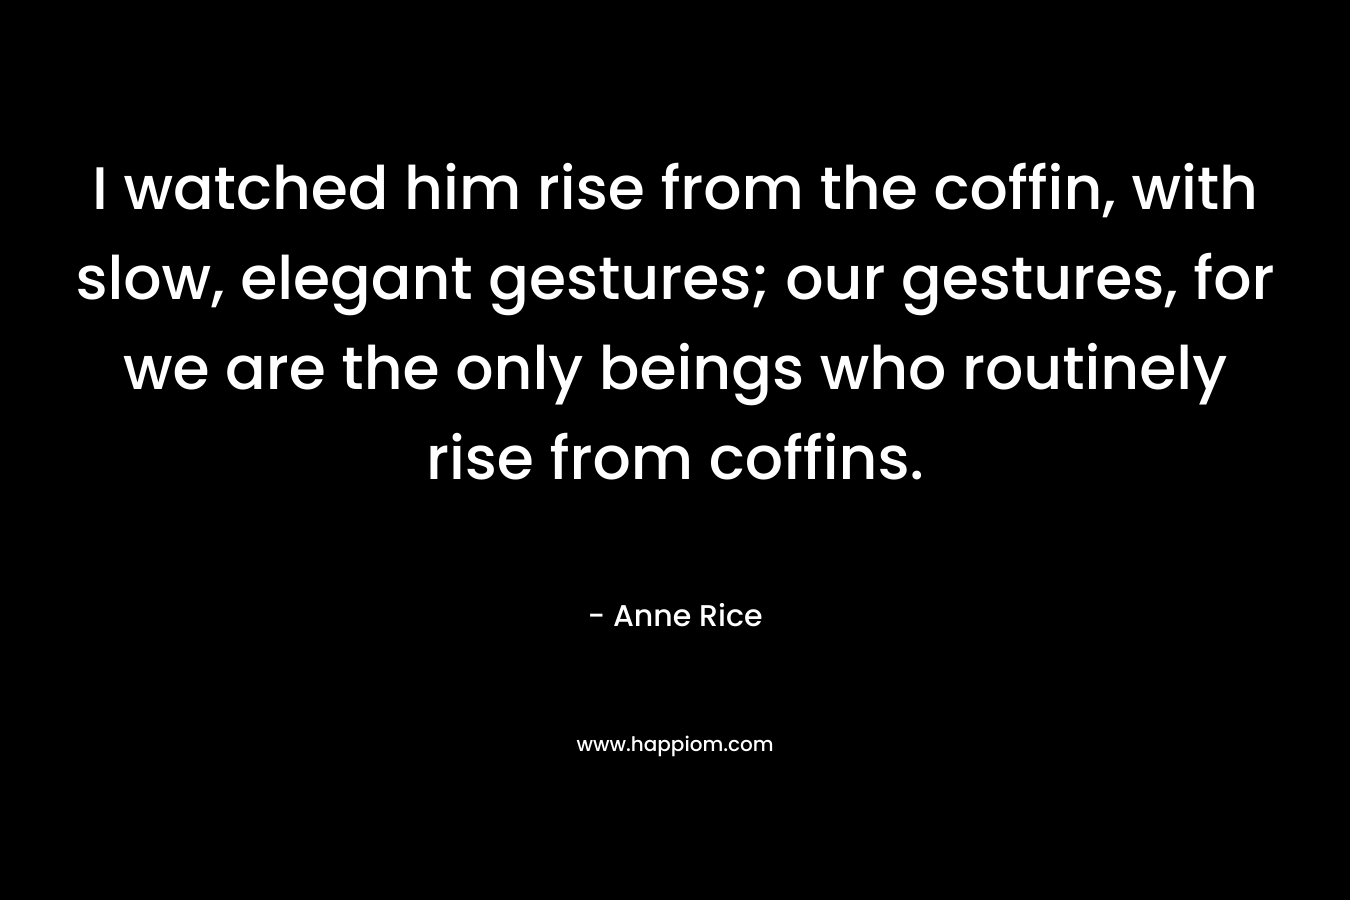 I watched him rise from the coffin, with slow, elegant gestures; our gestures, for we are the only beings who routinely rise from coffins.